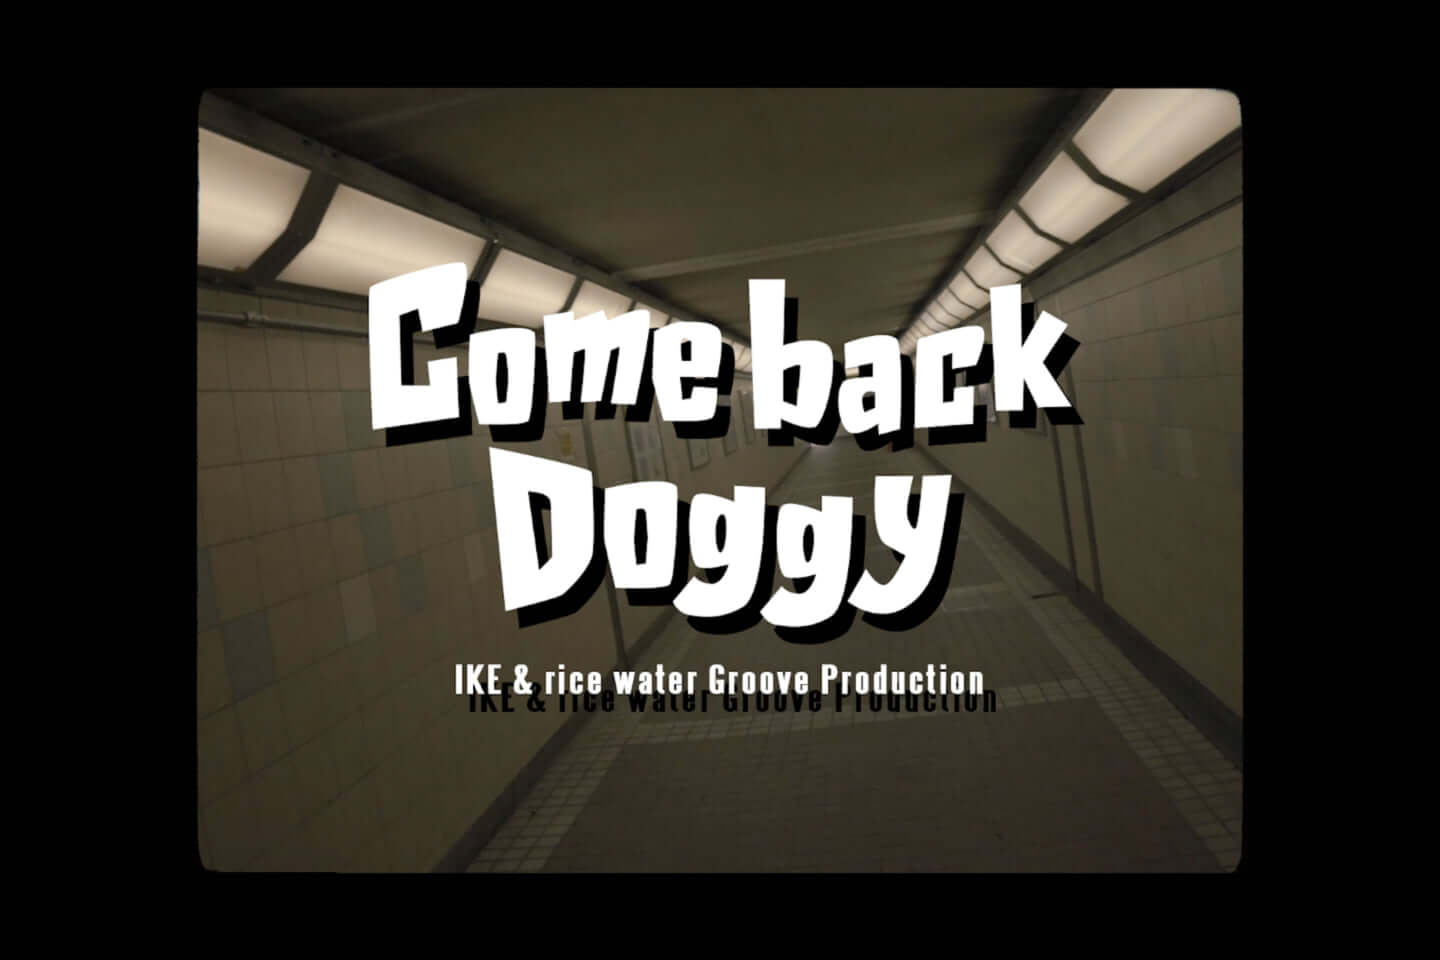 IKE & rice water Groove Production - Comeback Doggy